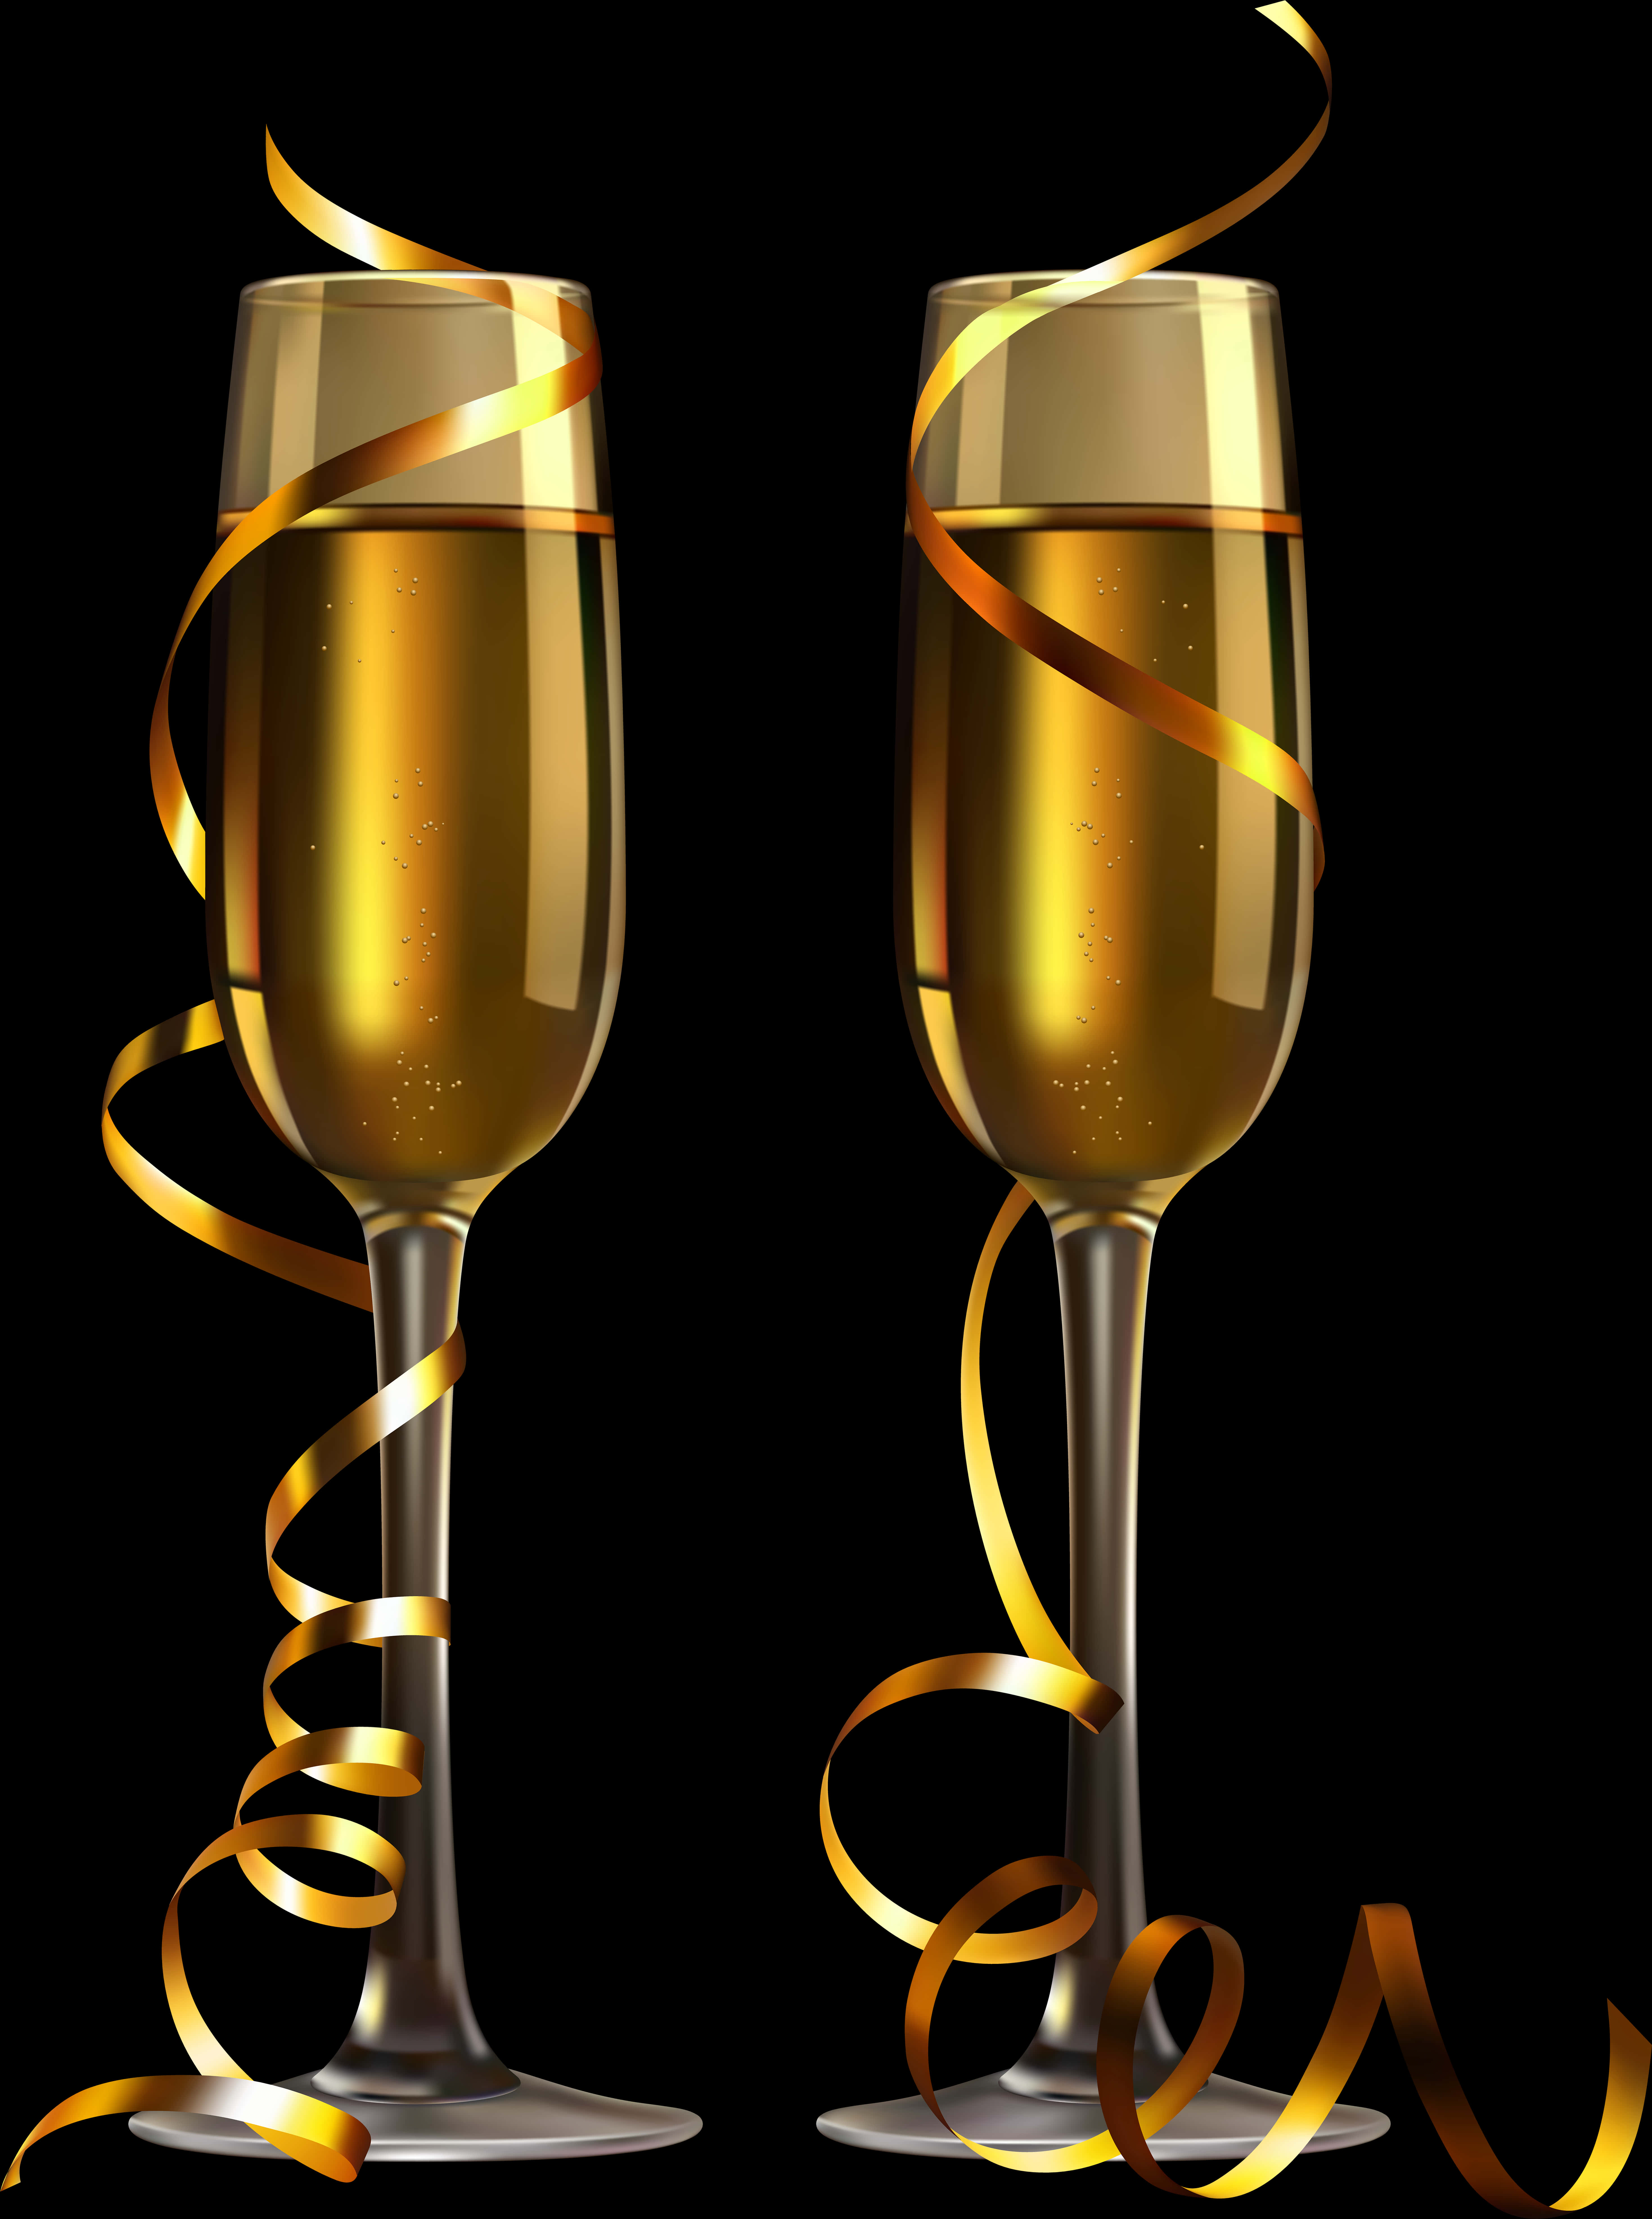 Two Glasses Of Champagne With Gold Ribbons